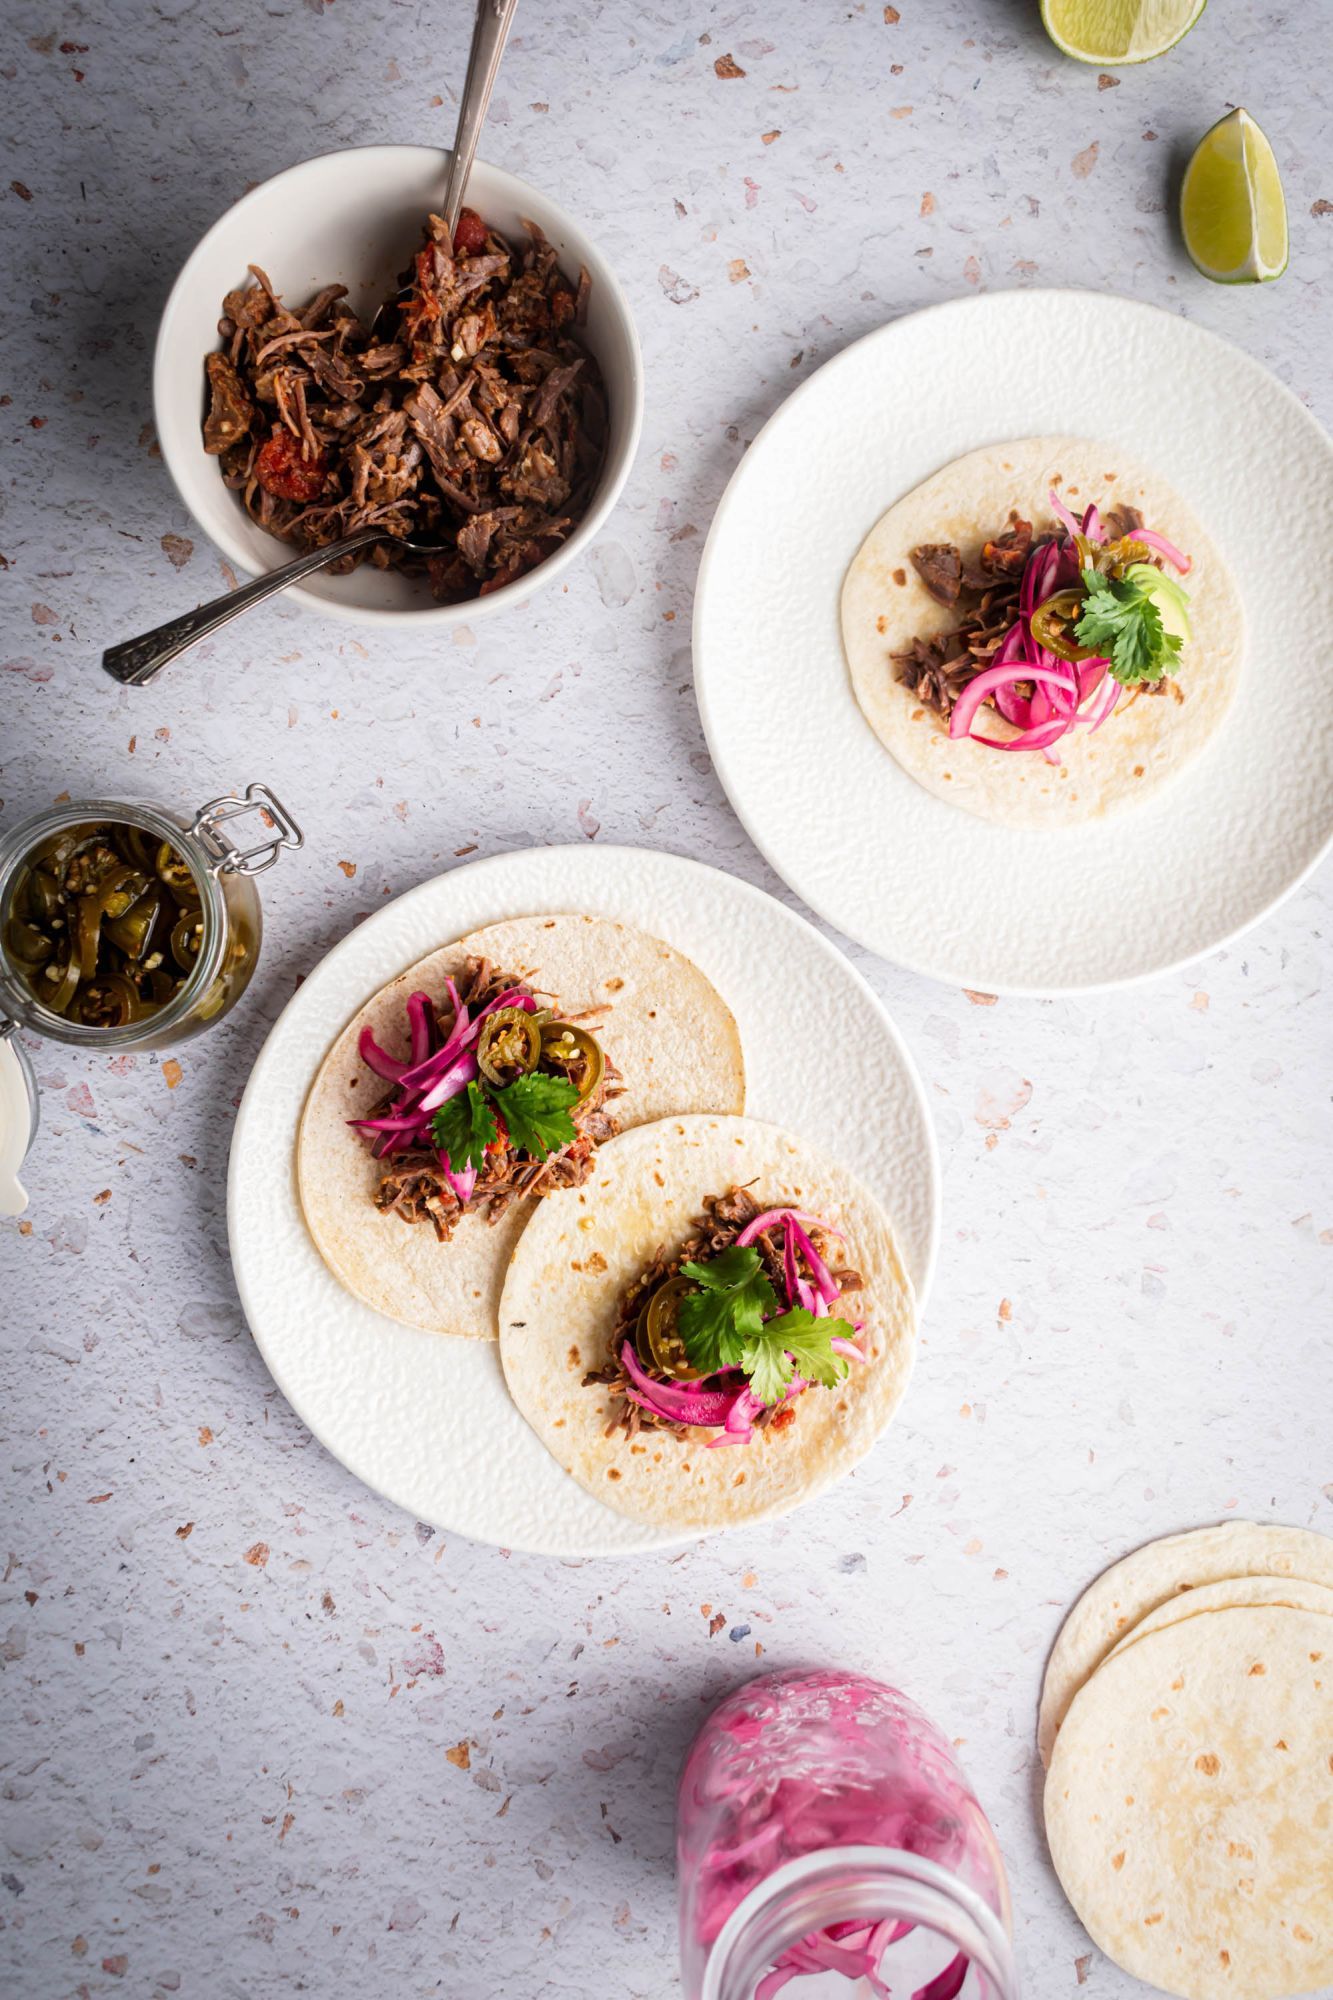 Mexican shredded beef tacos served on flour tortillas with pickled red onions, jalapenos, and cilantro.